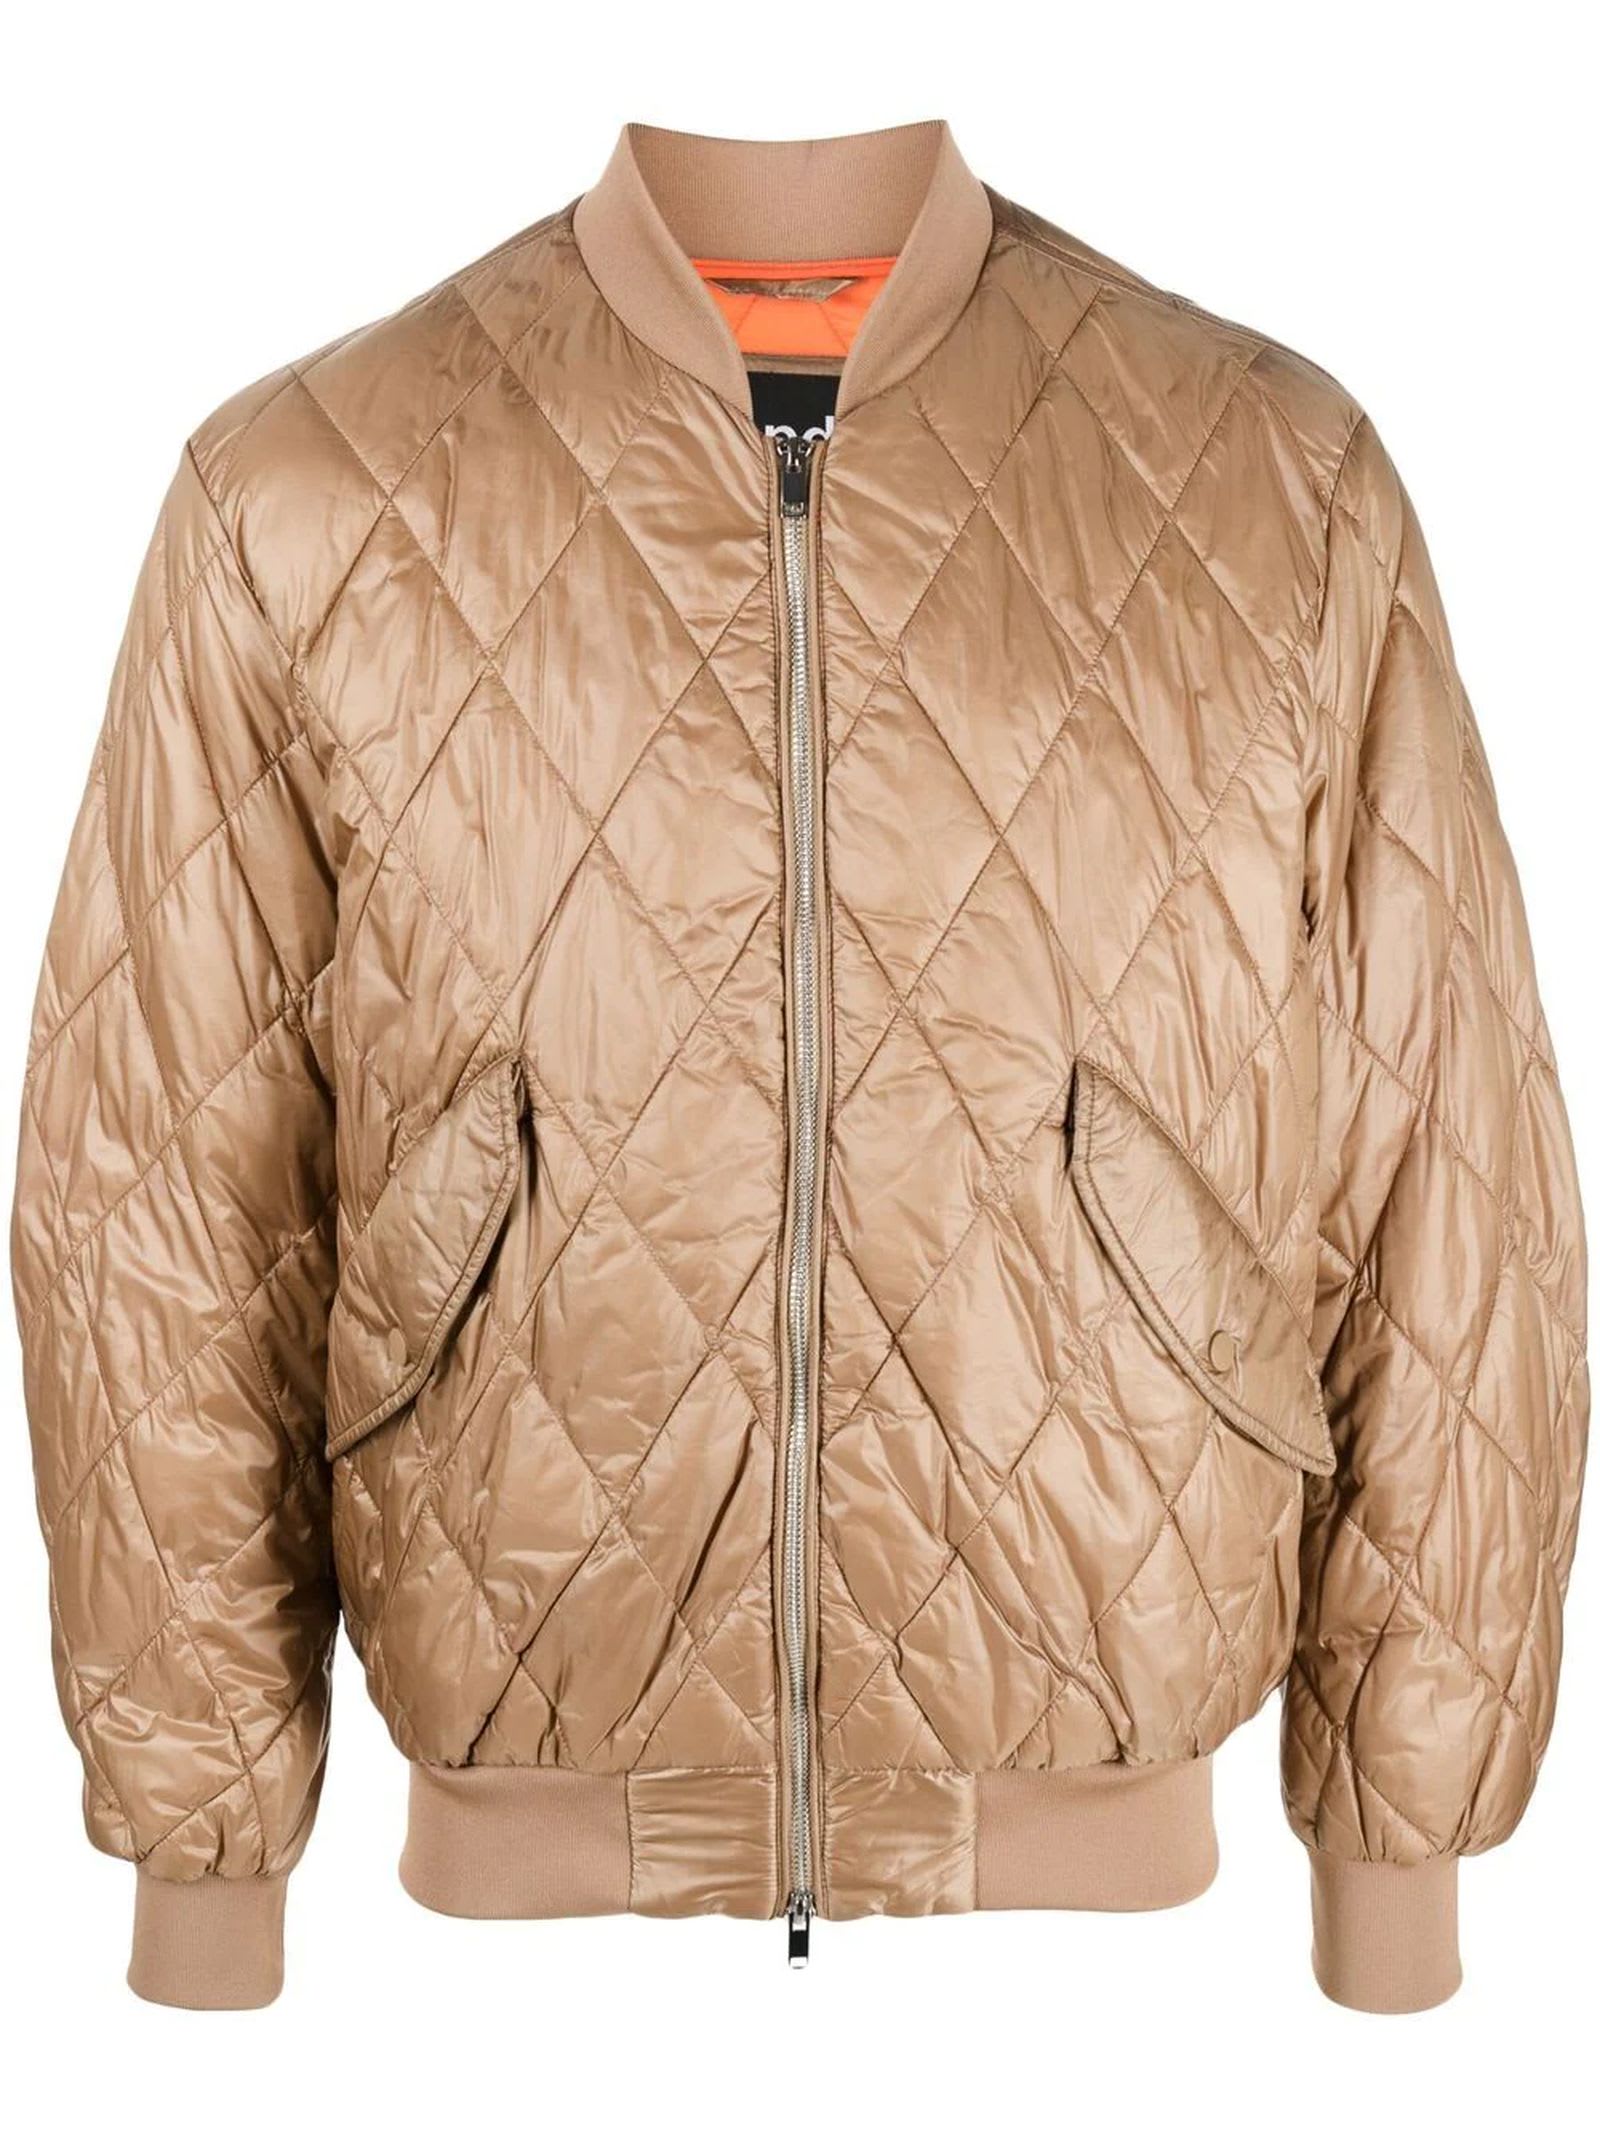 Bpd (Be Proud of this stress) Sand Beige Padded Jacket